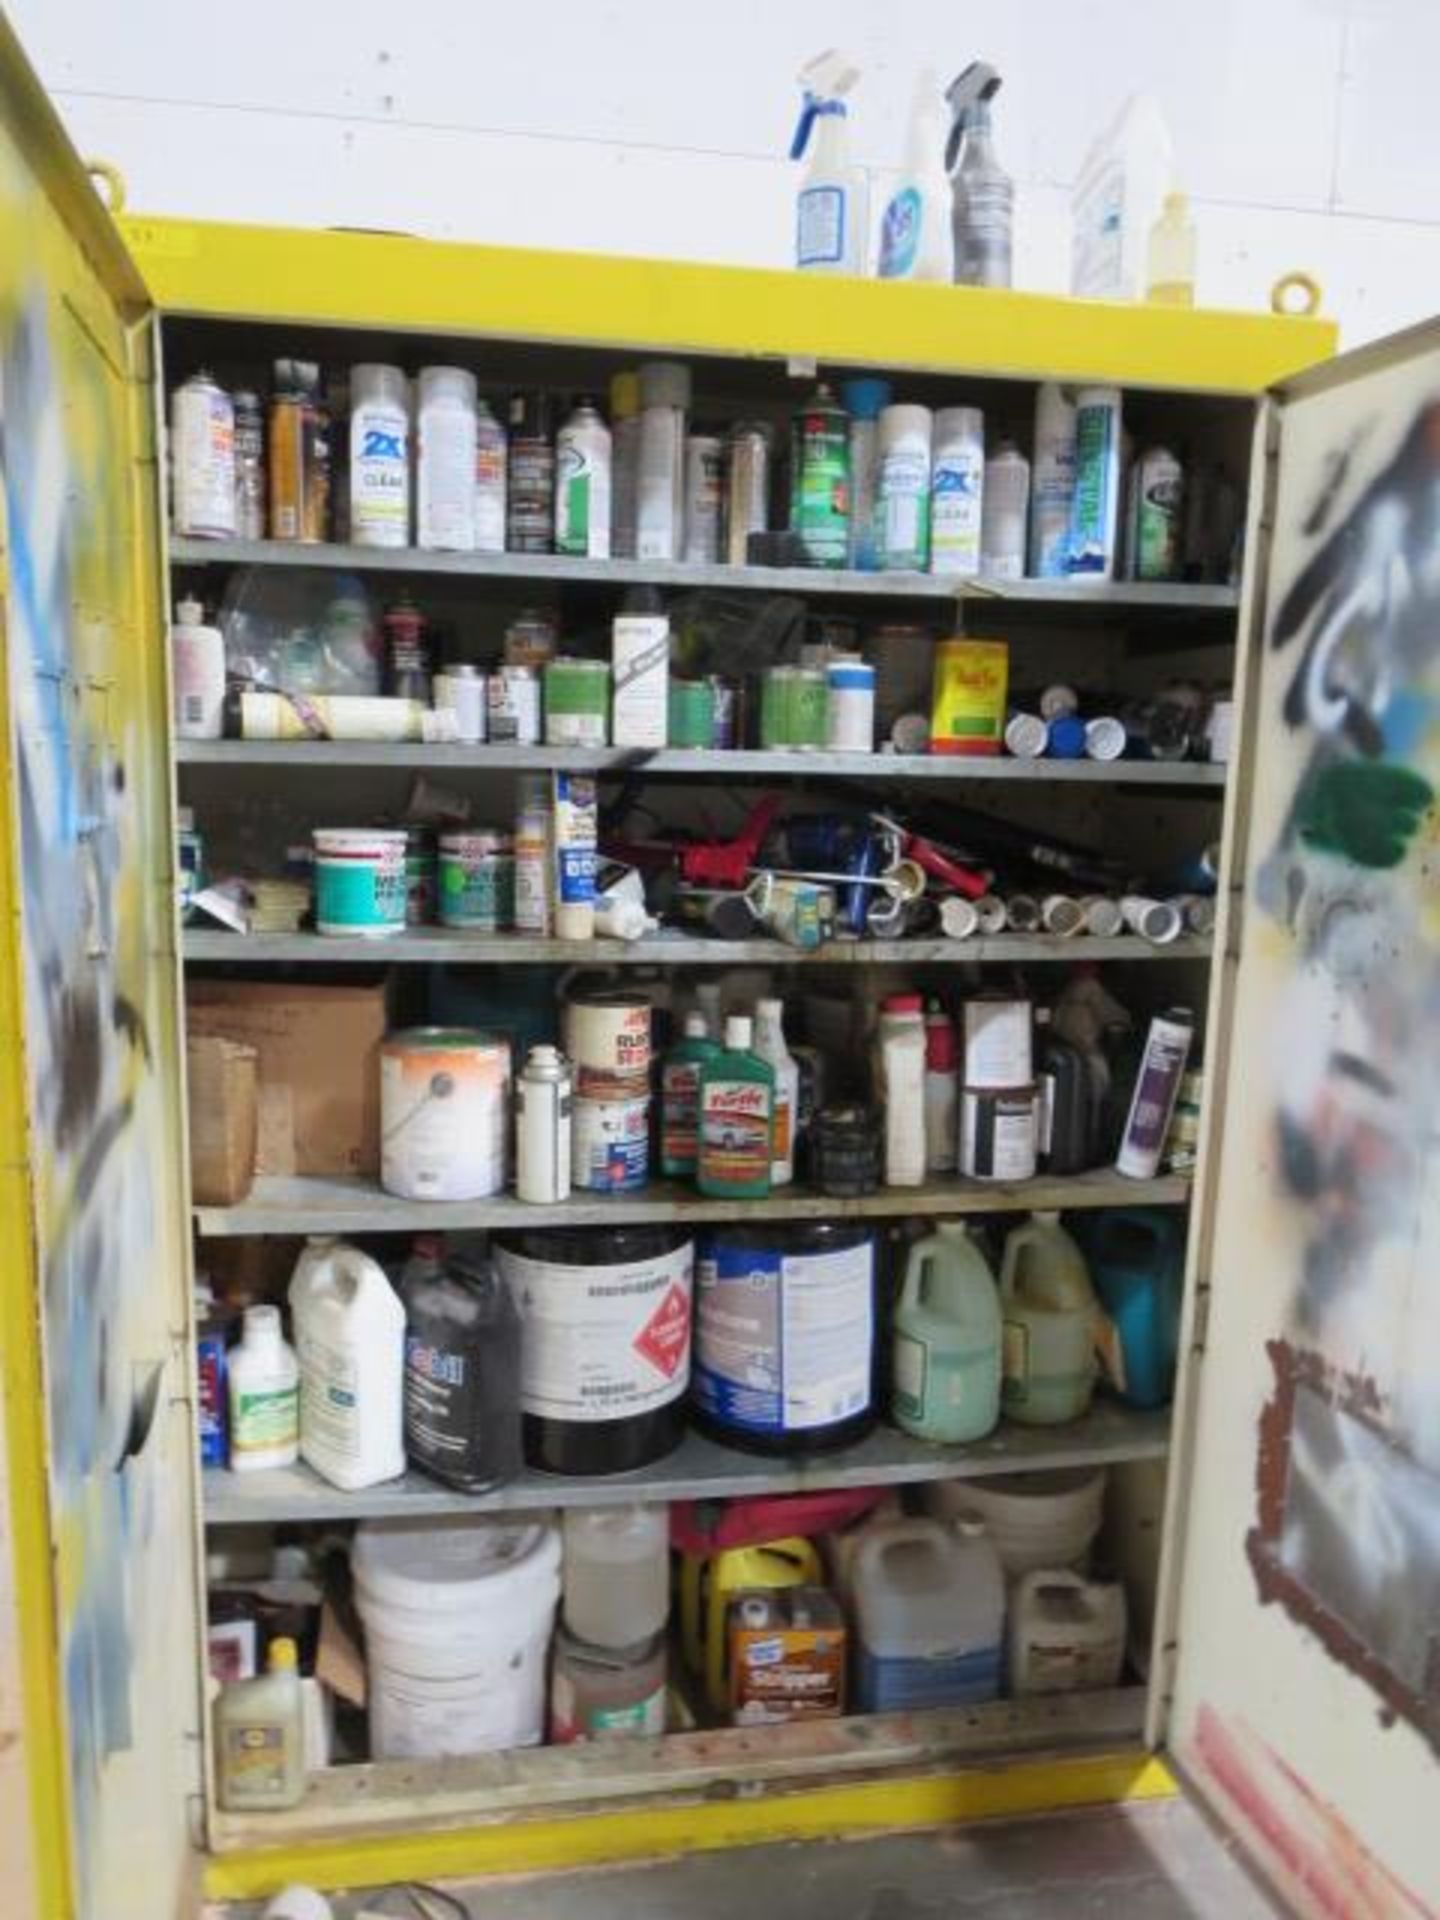 2 Door Fire Proof Metal Storage Cabinet, Includes Contents Consisting of Assorted Spray Paints, - Image 2 of 2